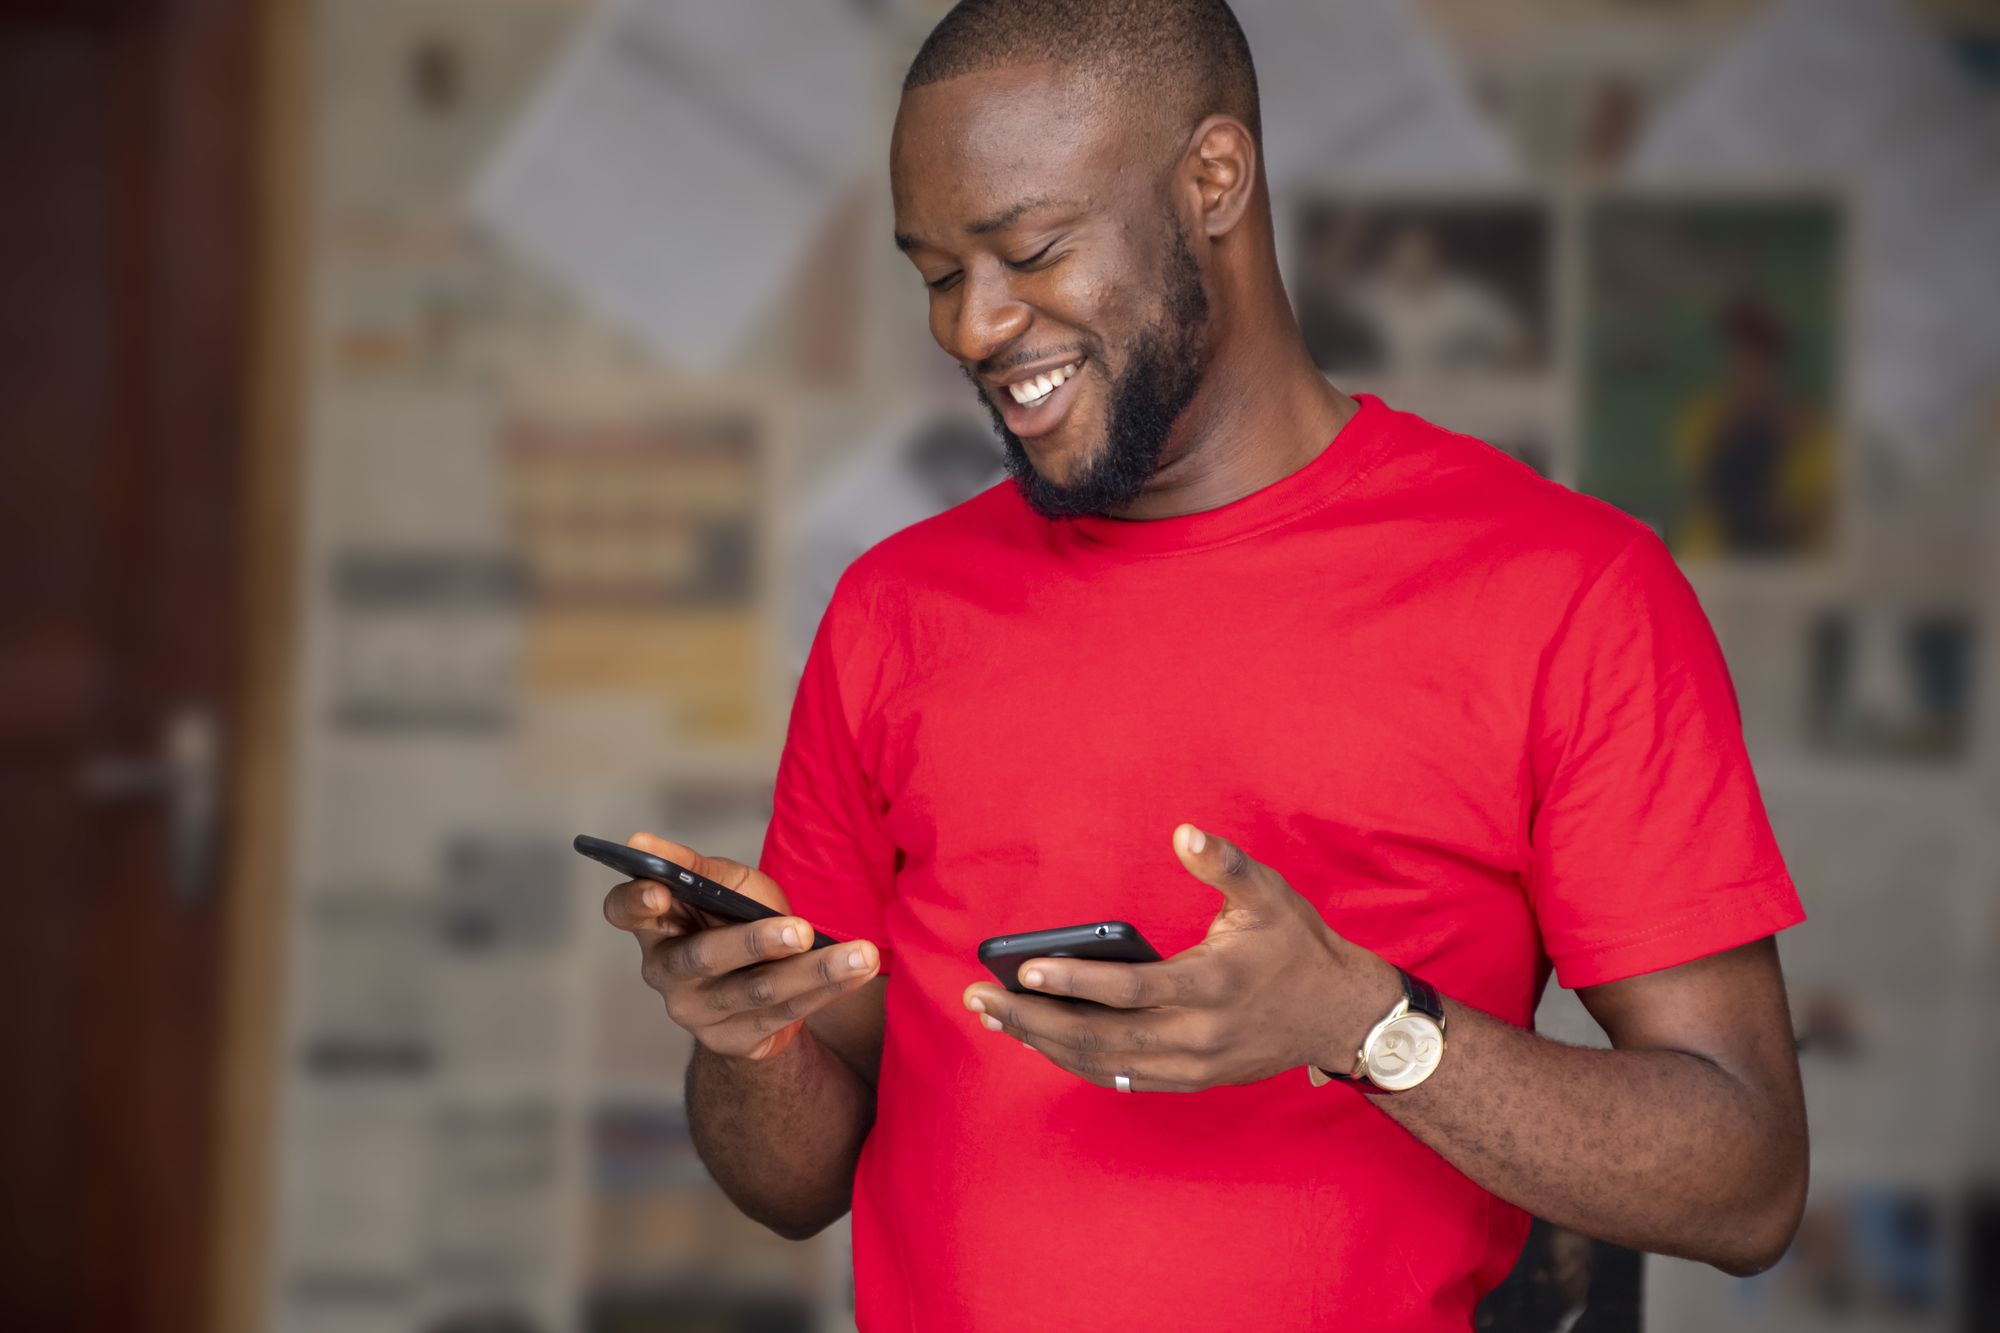 A man smiling after completing a transaction with his mobile phone